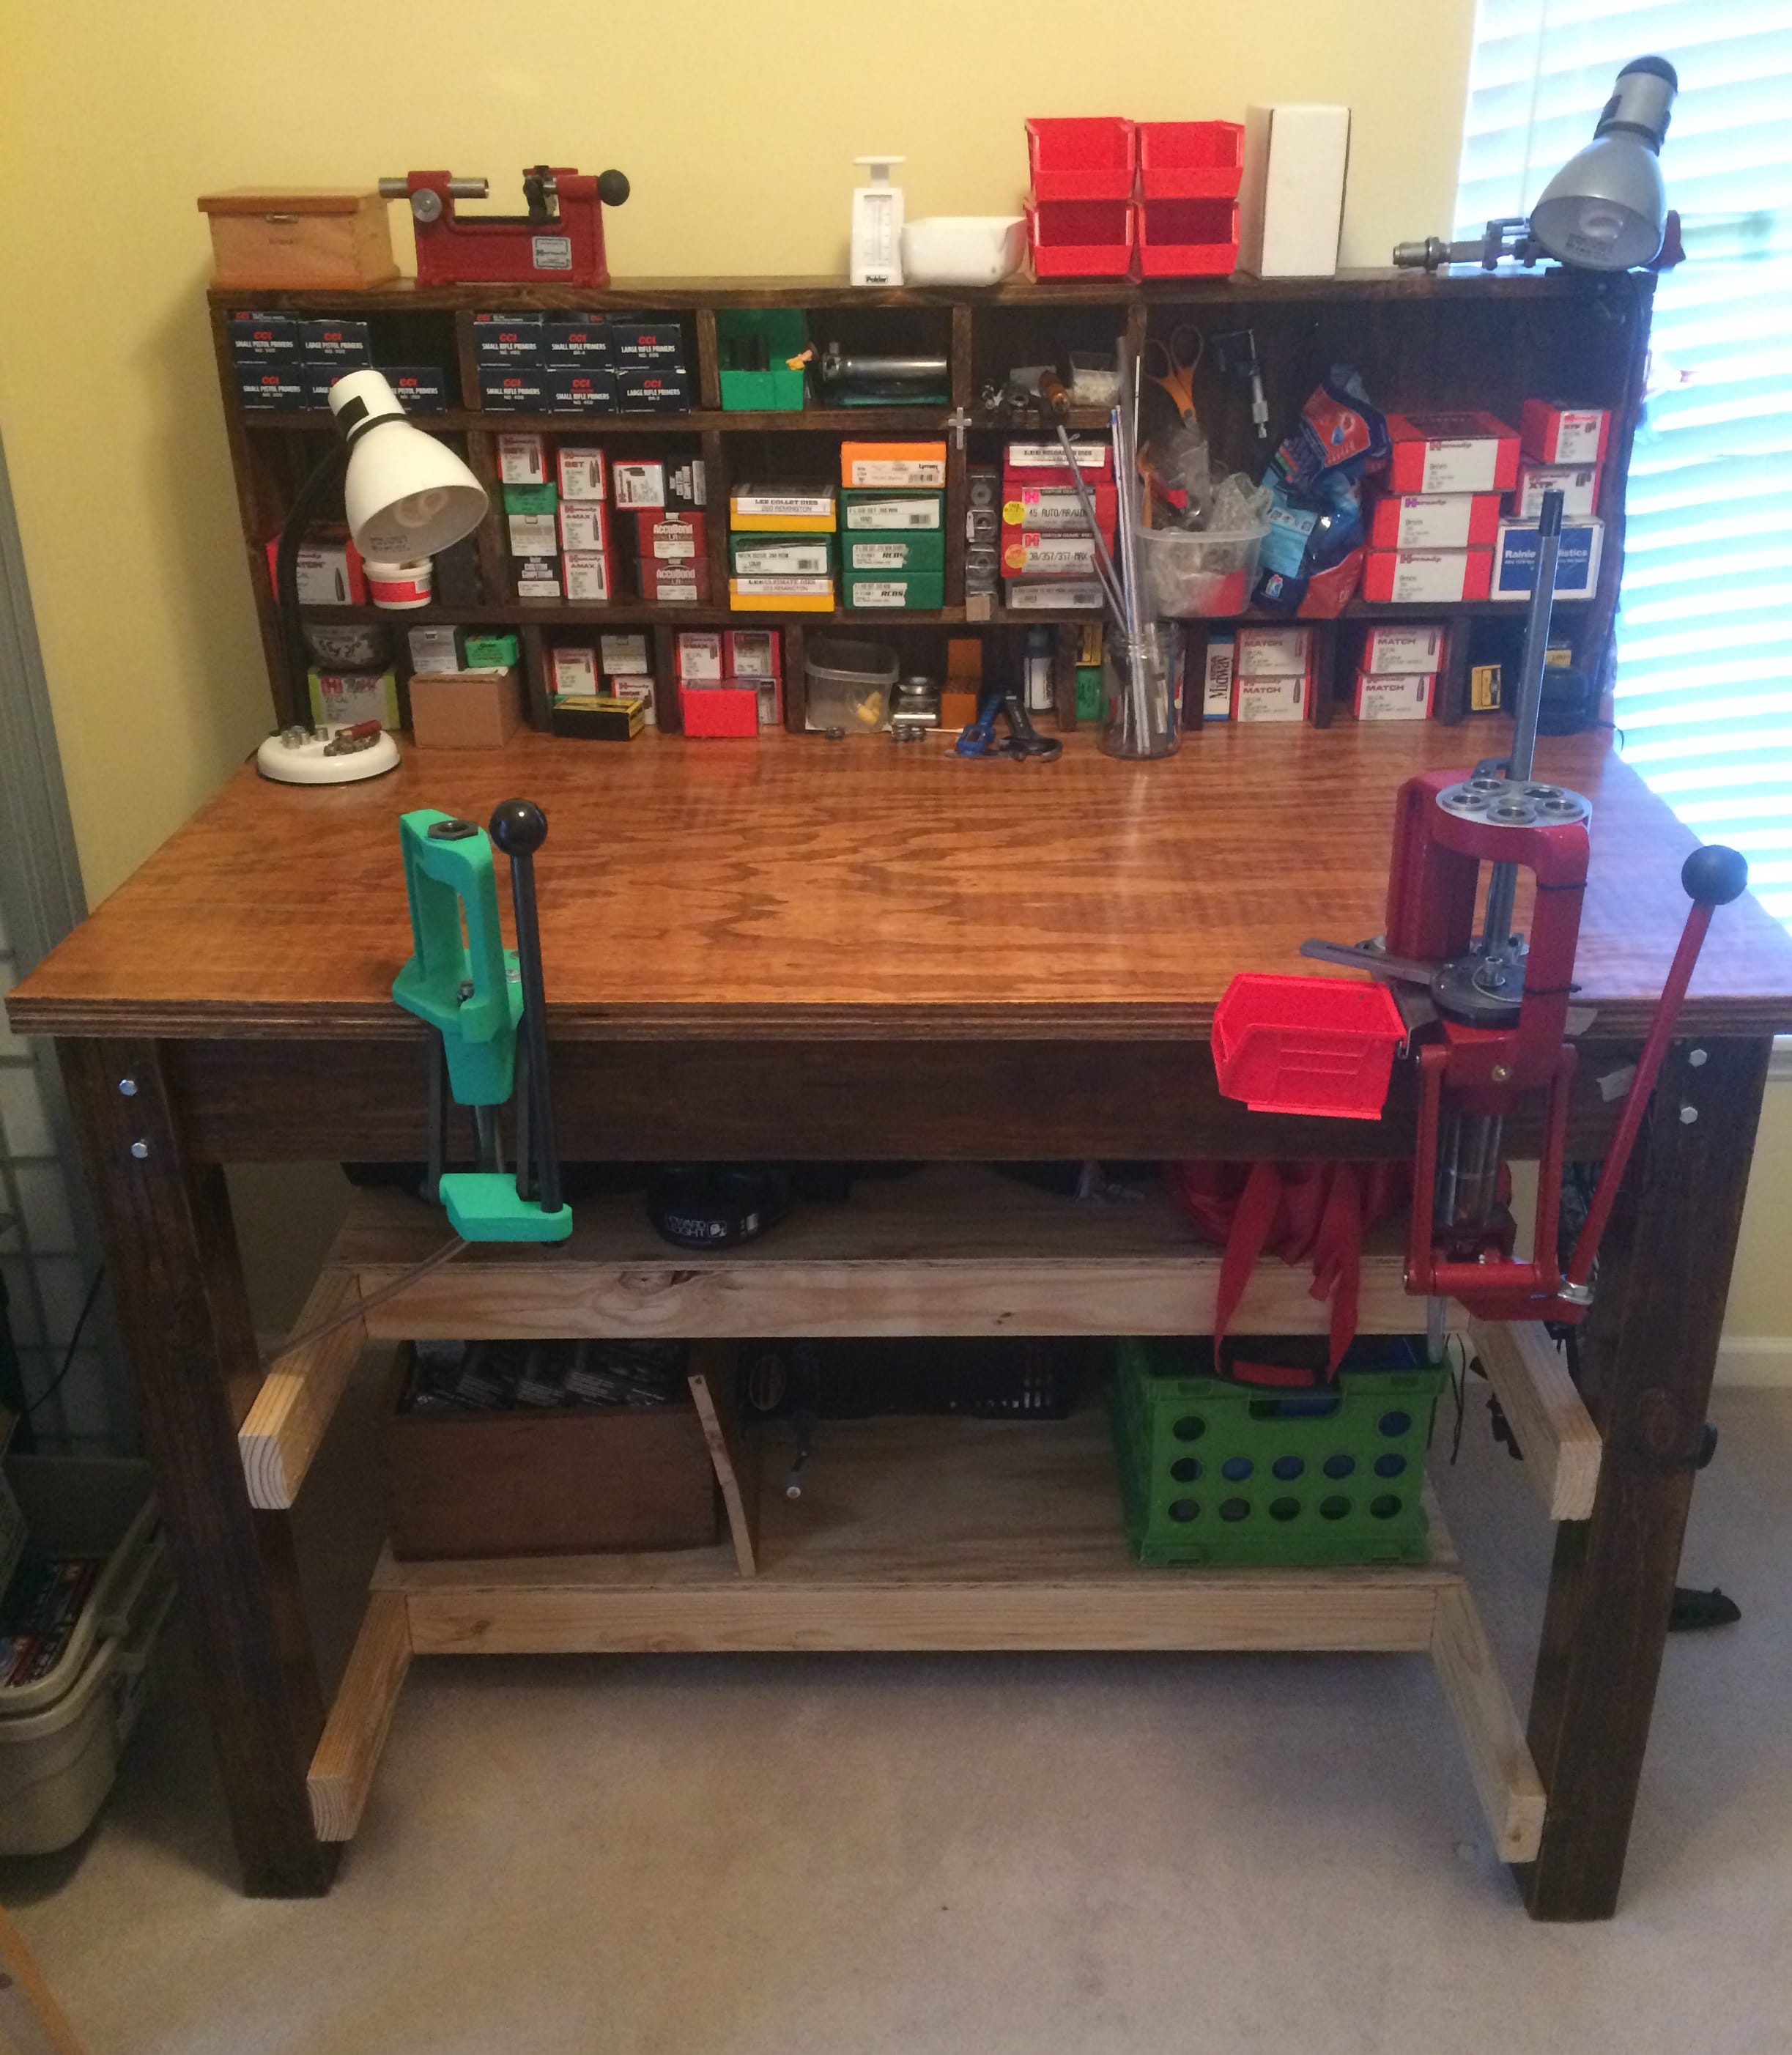 Building a Reloading Workbench - Do's & Don'ts